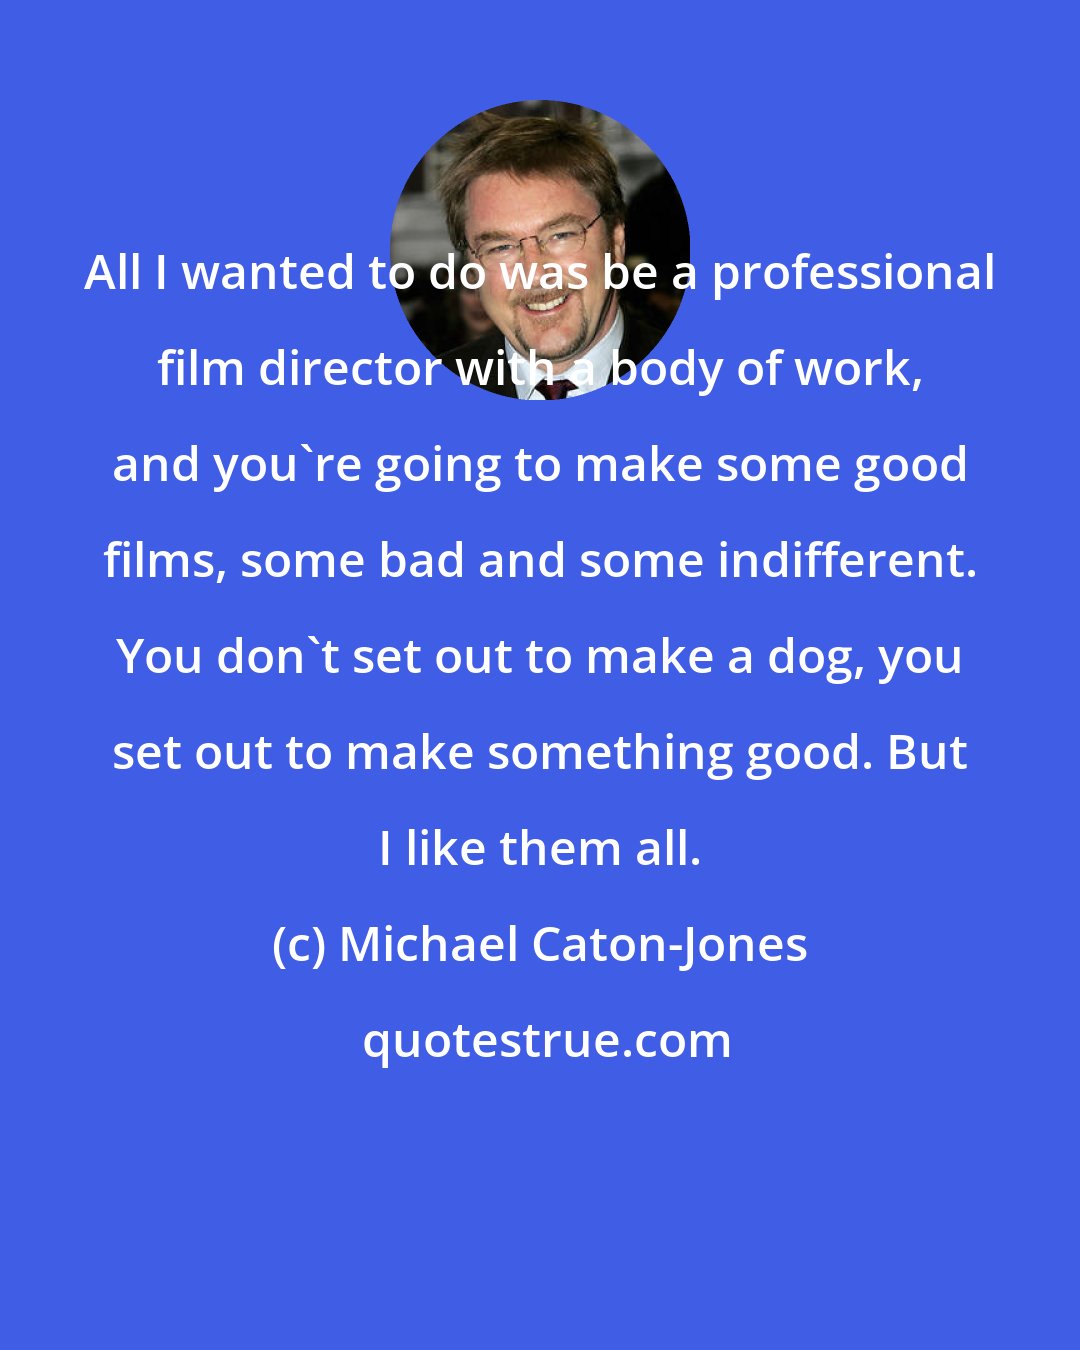 Michael Caton-Jones: All I wanted to do was be a professional film director with a body of work, and you're going to make some good films, some bad and some indifferent. You don't set out to make a dog, you set out to make something good. But I like them all.